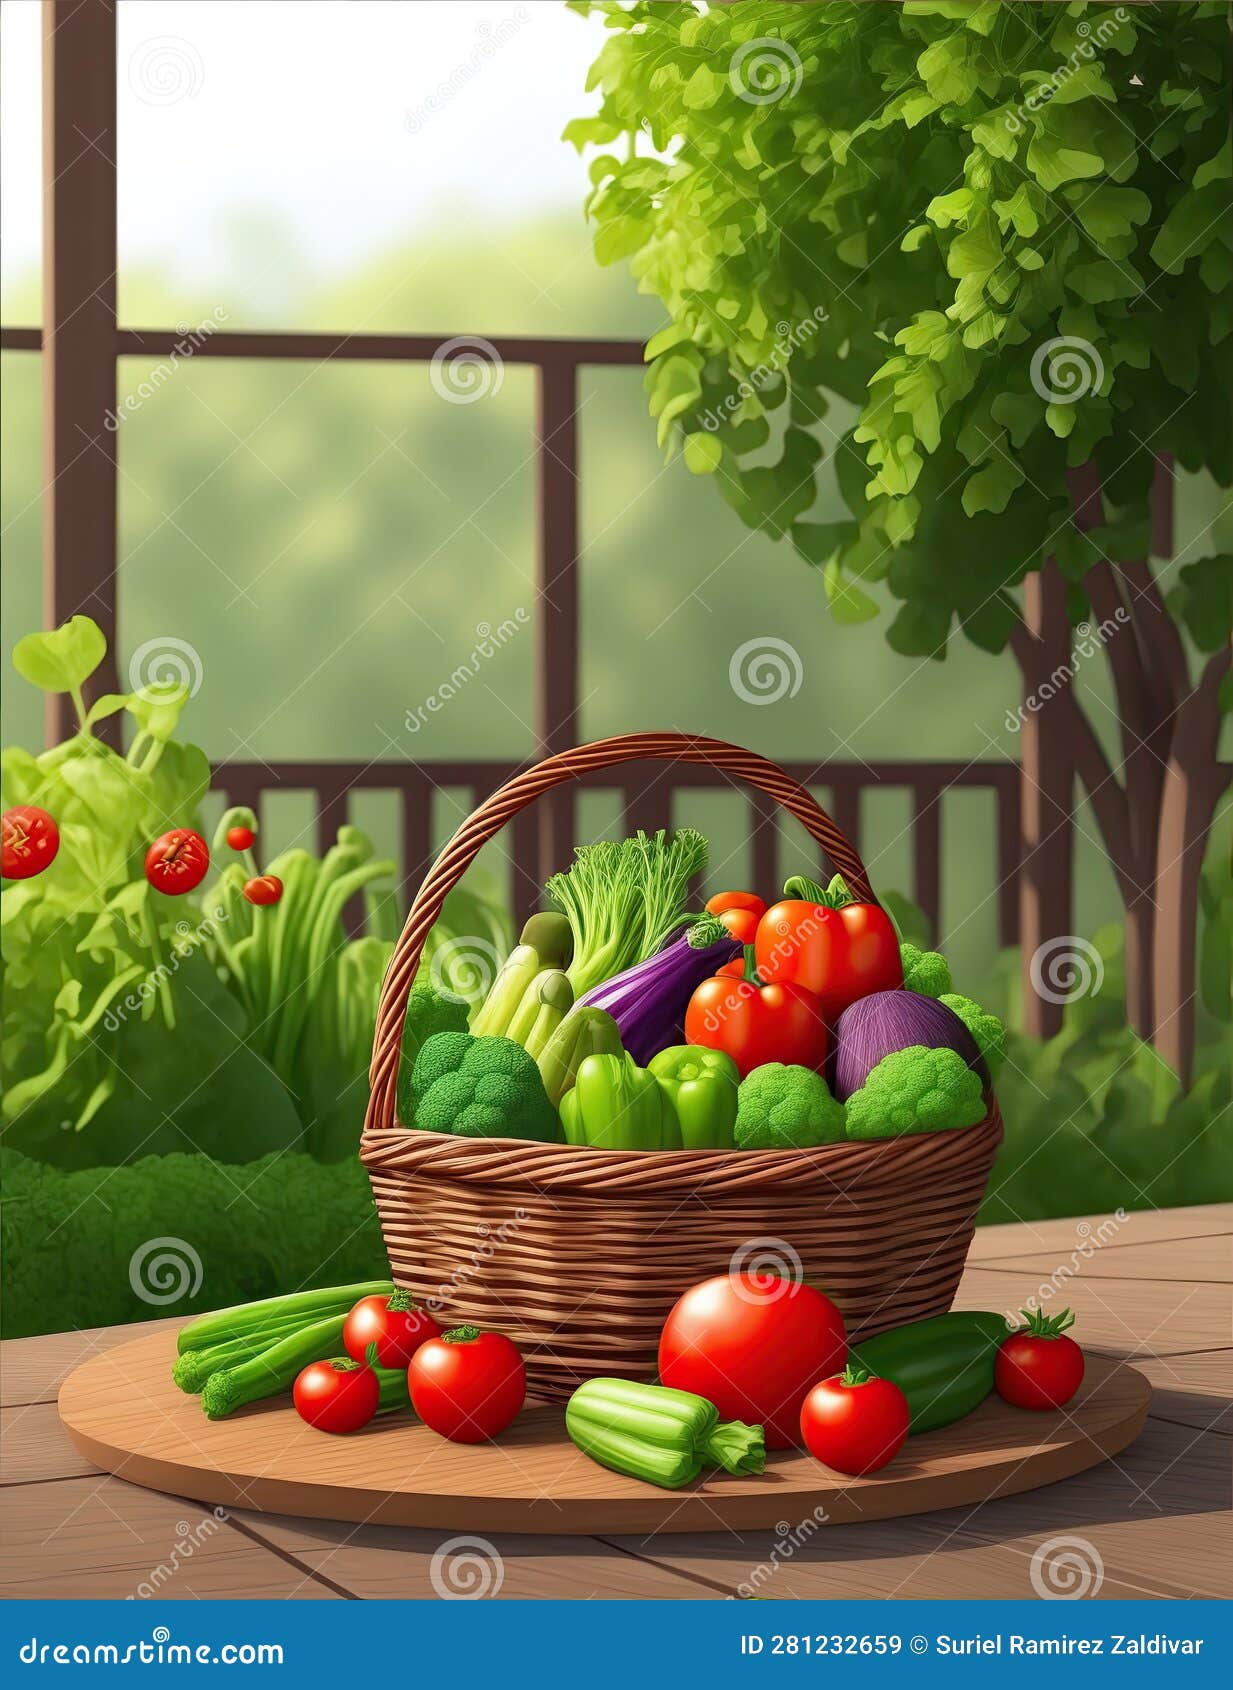 a basquet full of vegetables on a table in the garden